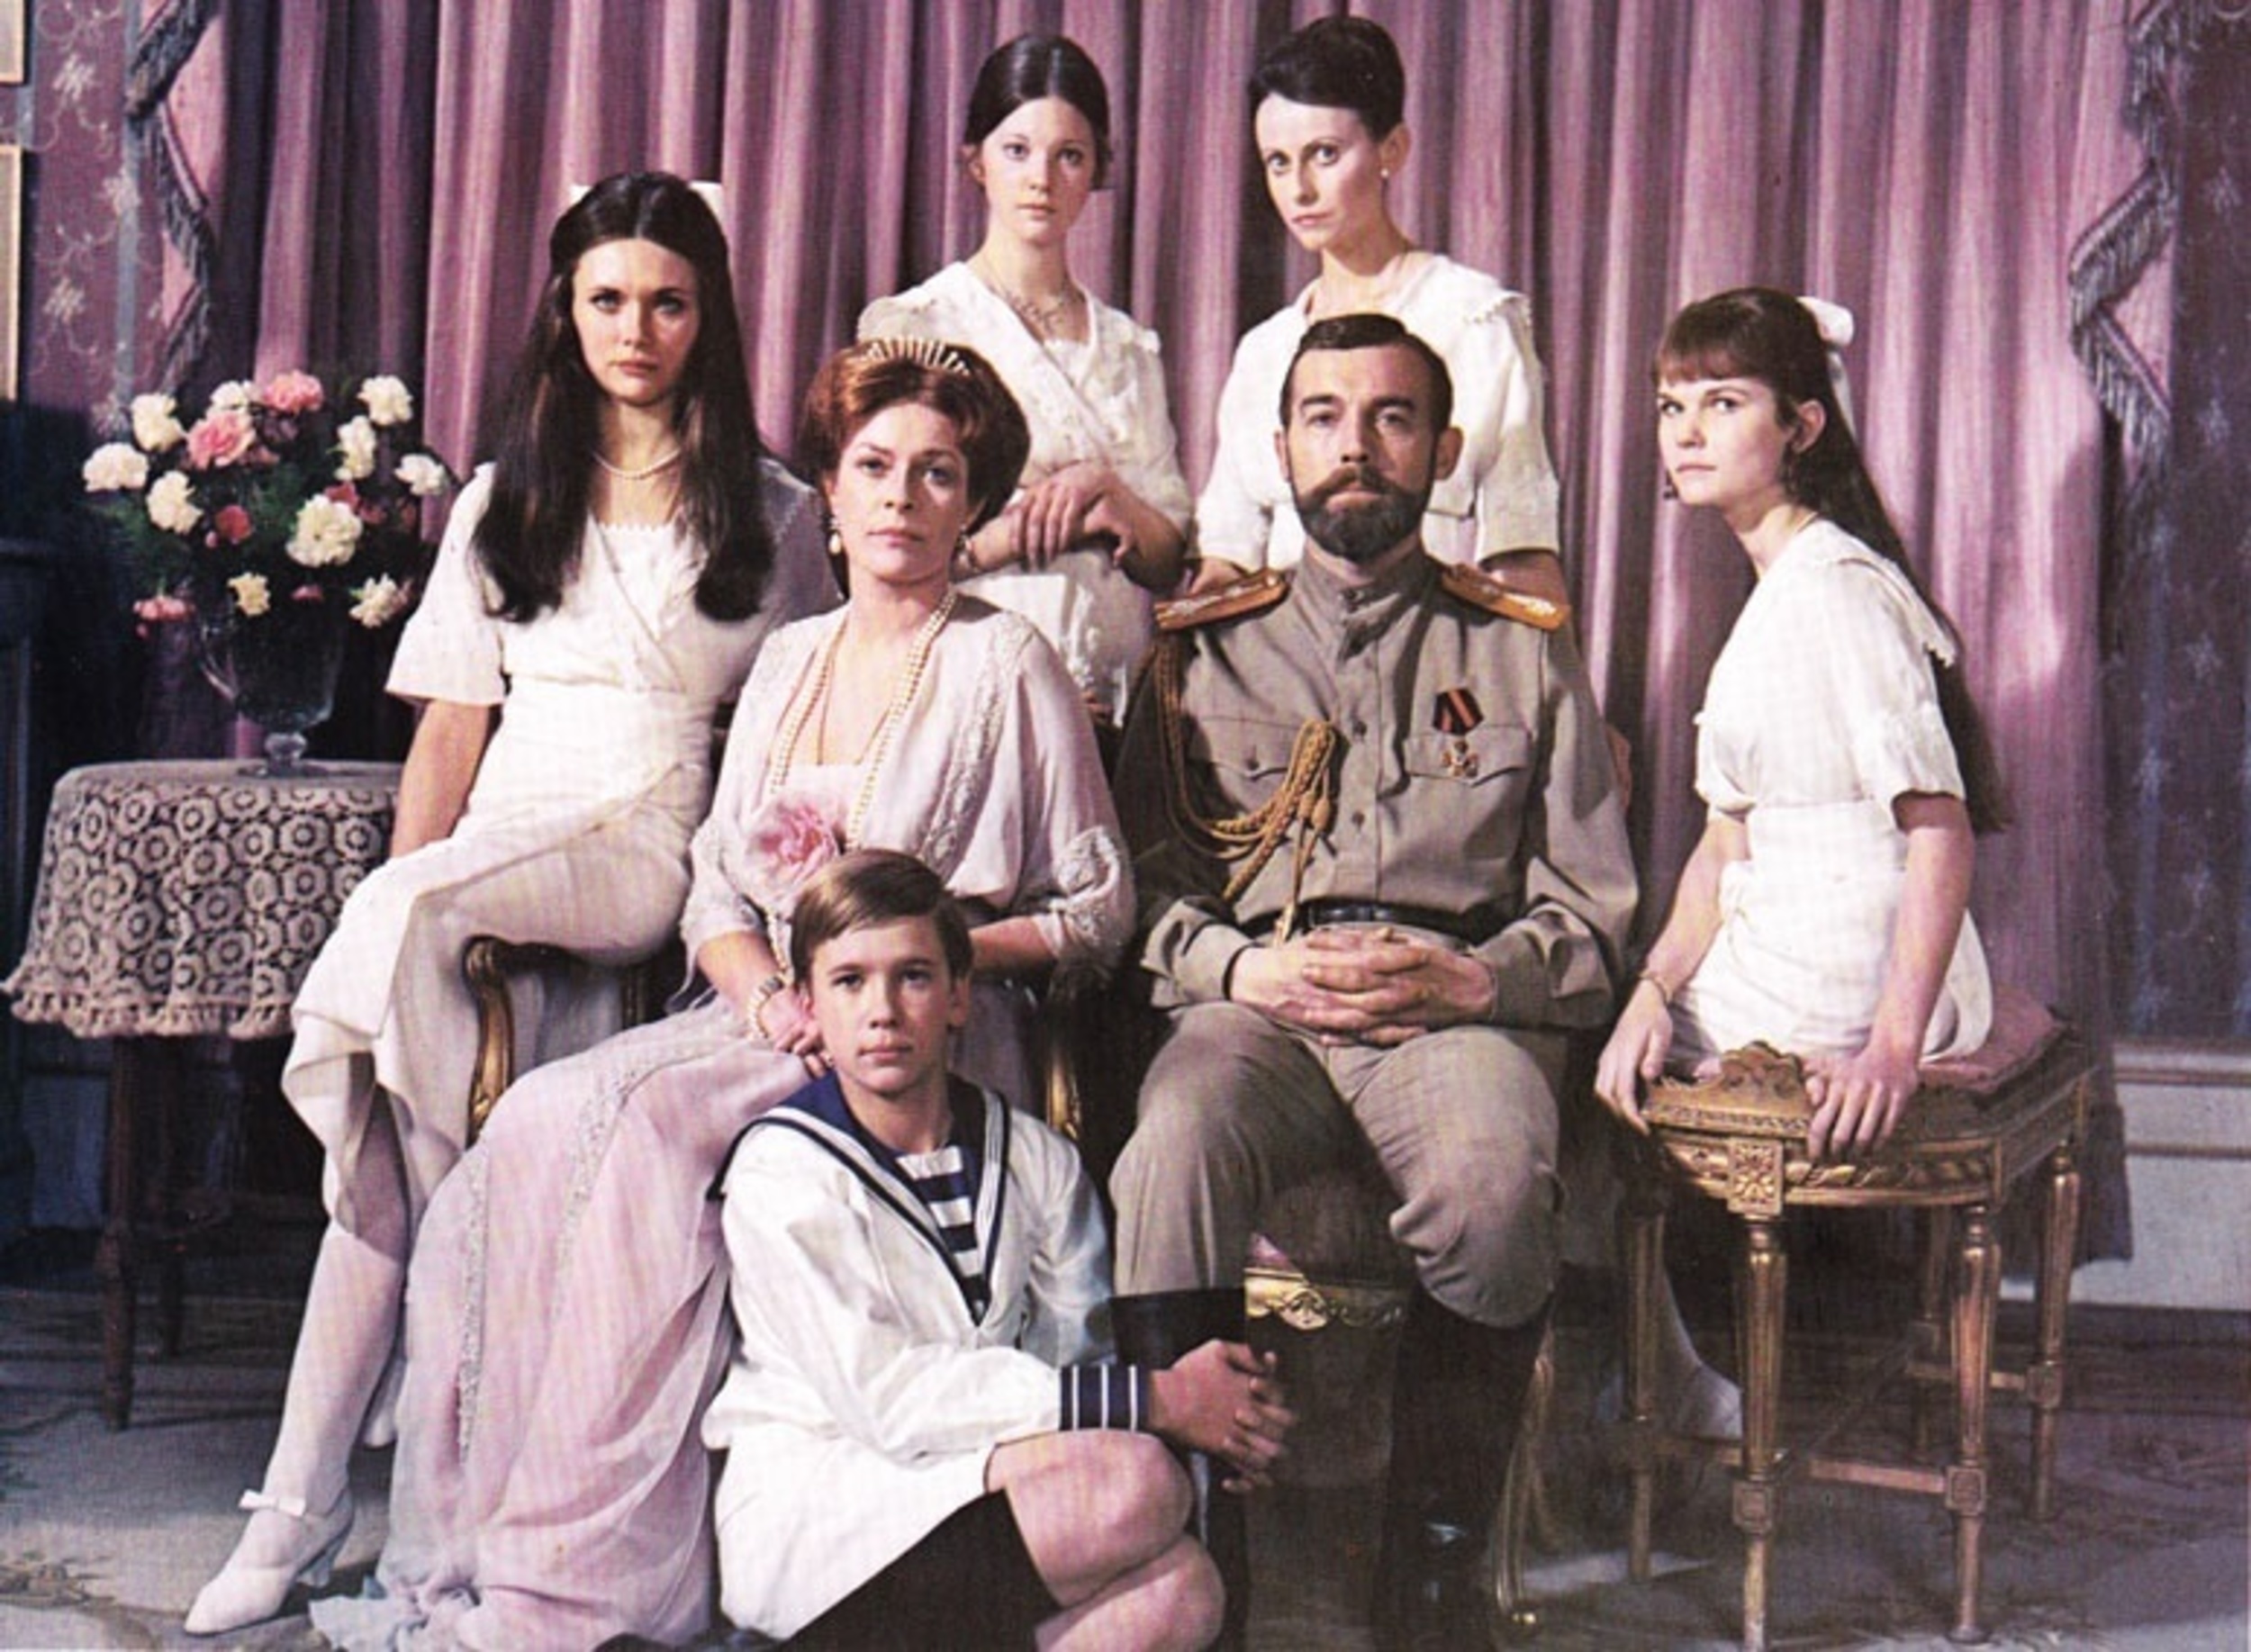 <p>The British also have an affinity for royalty from other countries, apparently. This is a British film about Tsar Nicholas II and his wife, Alexandra, the last ruling royals of Russia. Things did not turn out well for them, but <em>Nicholas and Alexandra</em> had a better go of it. The movie got a Best Picture nomination</p><p><a href='https://www.msn.com/en-us/community/channel/vid-cj9pqbr0vn9in2b6ddcd8sfgpfq6x6utp44fssrv6mc2gtybw0us'>Follow us on MSN to see more of our exclusive entertainment content.</a></p>